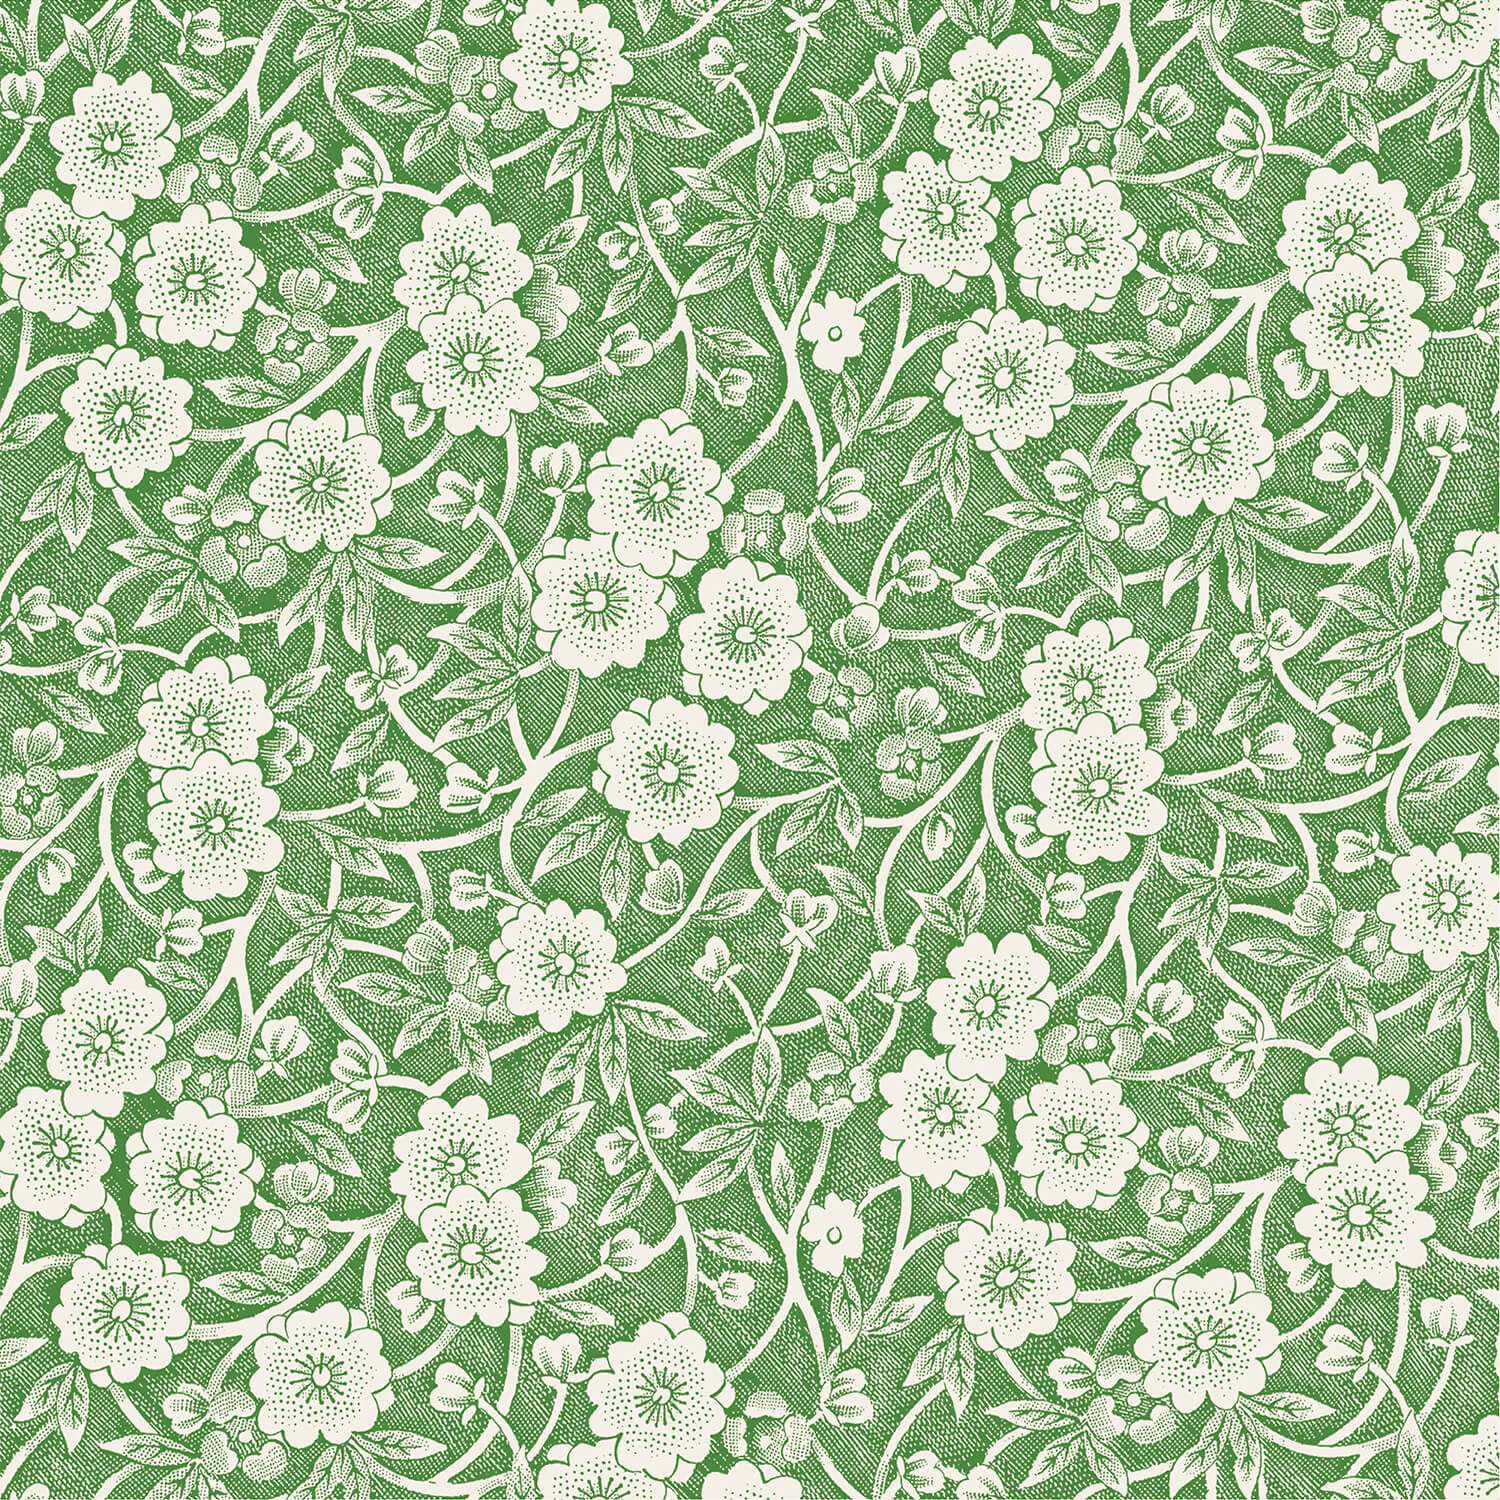 A square cocktail napkin featuring a dense pattern of white flowers, stems and leaves on a green background.